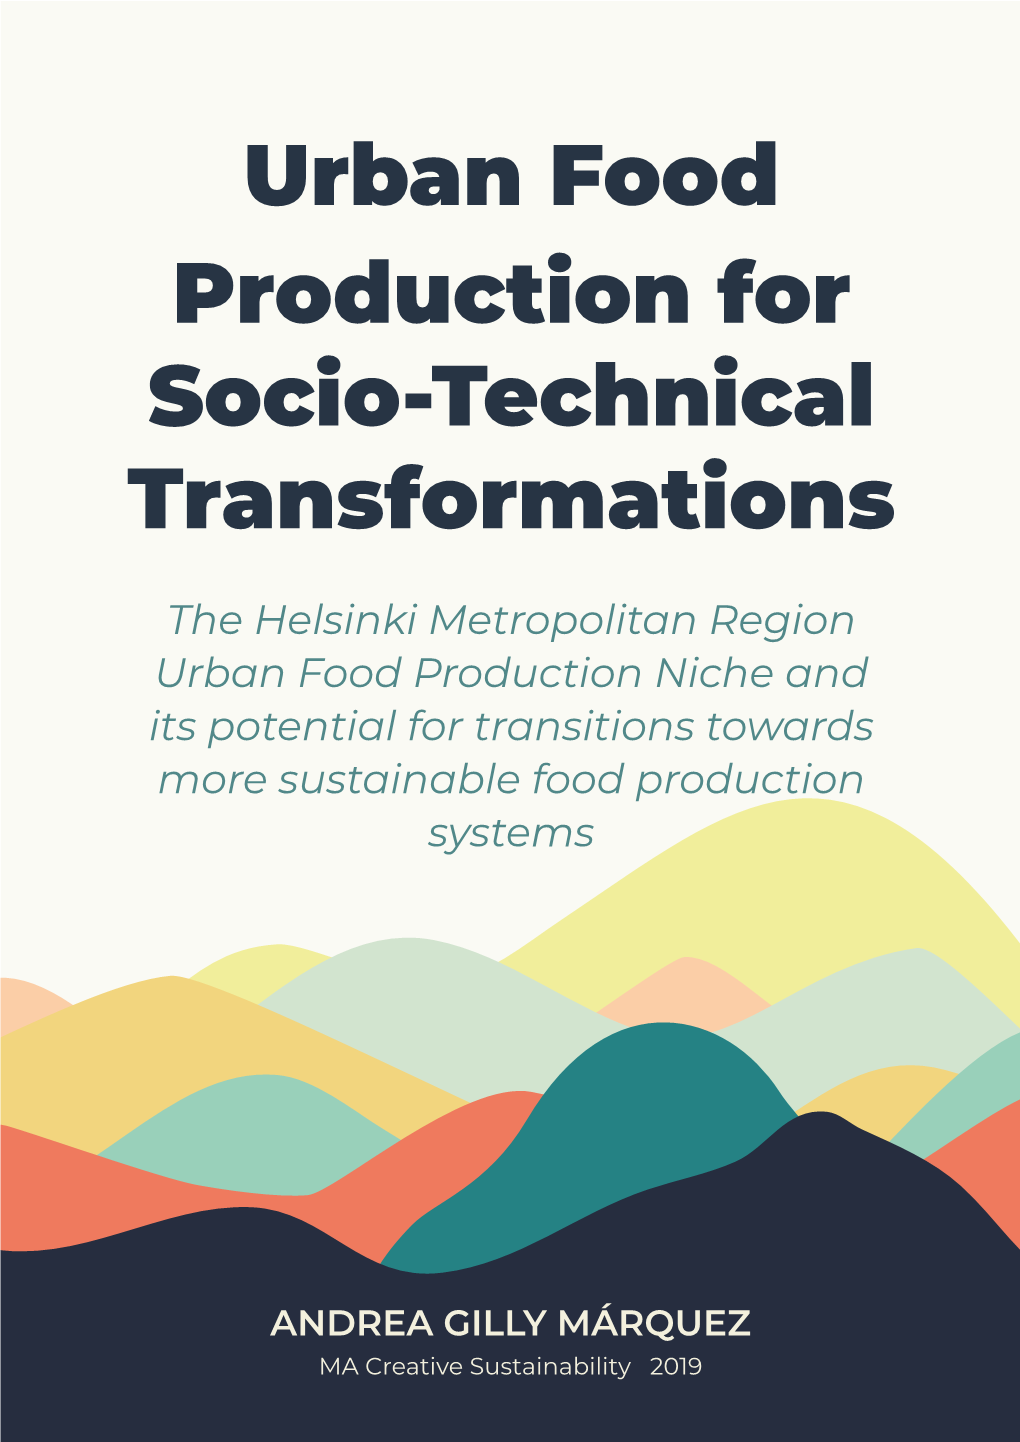 Urban Food Production for Socio-Technical Transformations